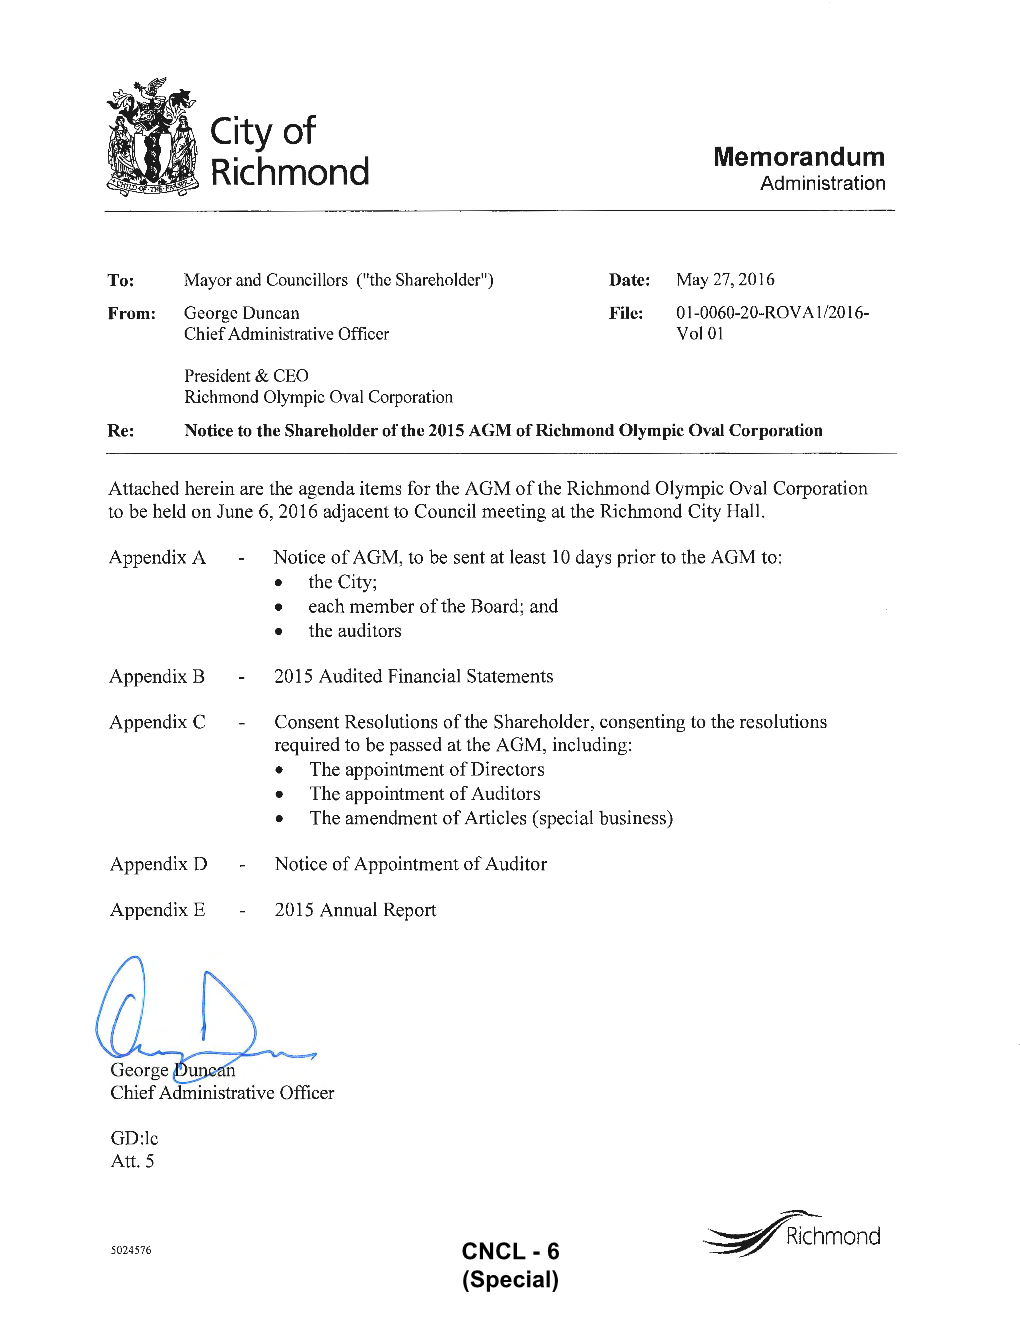 Richmond Olympic Oval Corporation Re: Notice to the Shareholder of the 2015 AGM of Richmond Olympic Oval Corporation